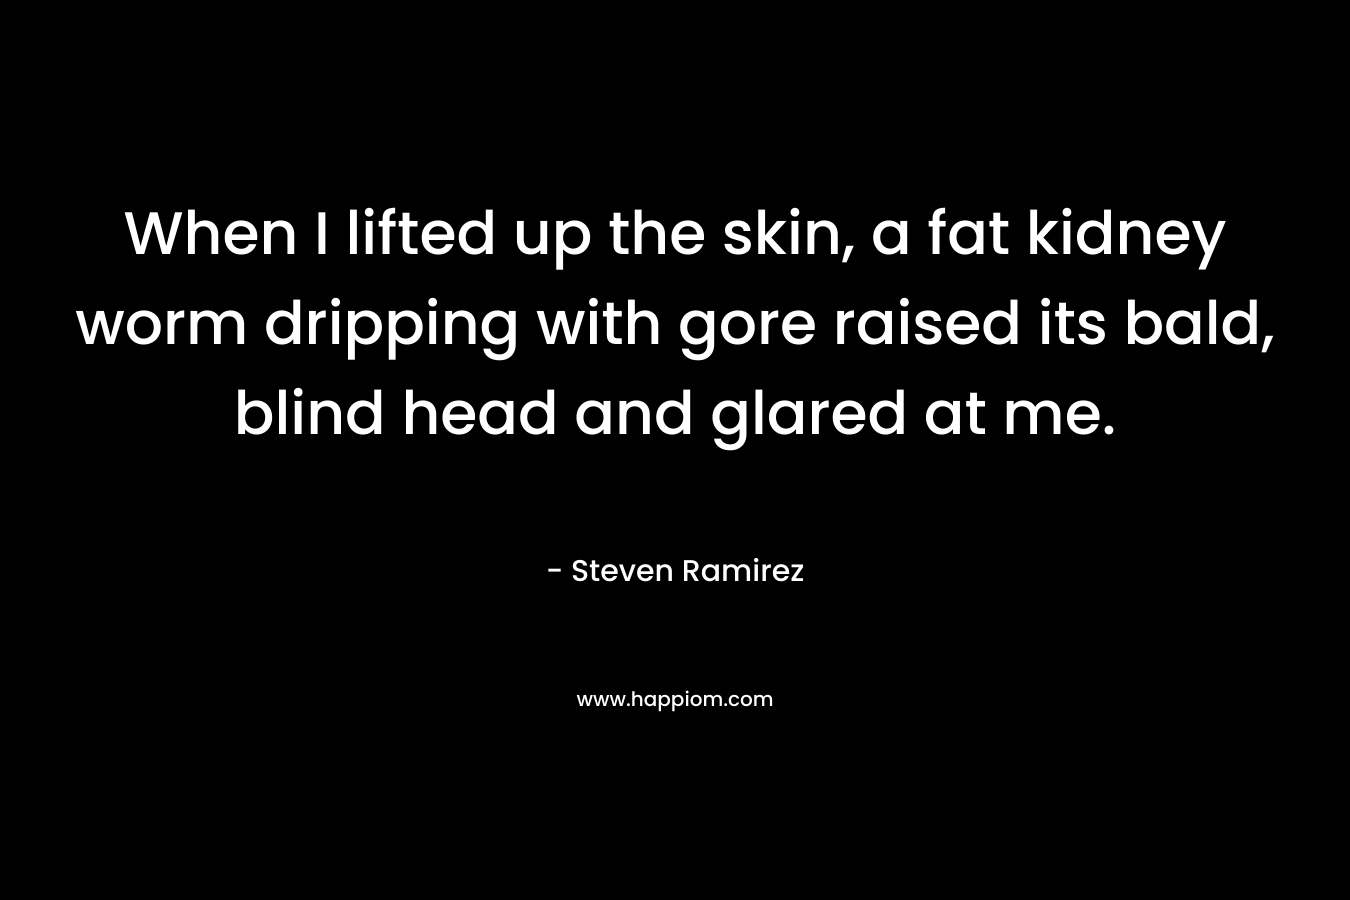 When I lifted up the skin, a fat kidney worm dripping with gore raised its bald, blind head and glared at me. – Steven Ramirez